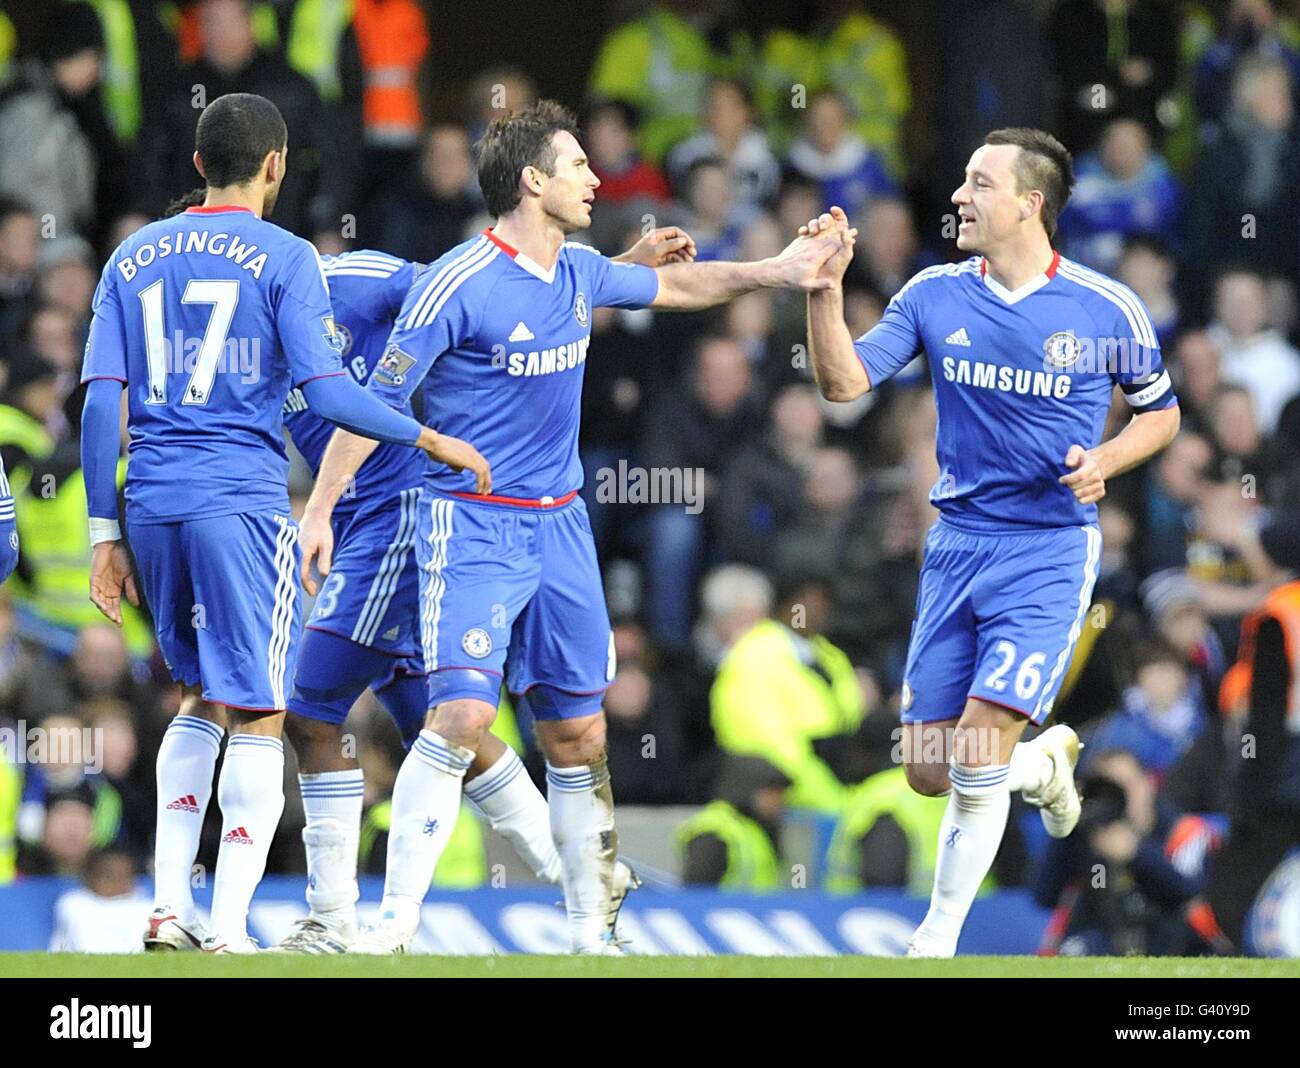 Soccer - FA Cup - Third Round - Chelsea v Ipswich Town - Stamford Bridge. Chelsea captain John Terry (right) celebrates with his team-mates after Ipswich Town's Carlos Edwards scored an own goal to put them 3-0 up Stock Photo